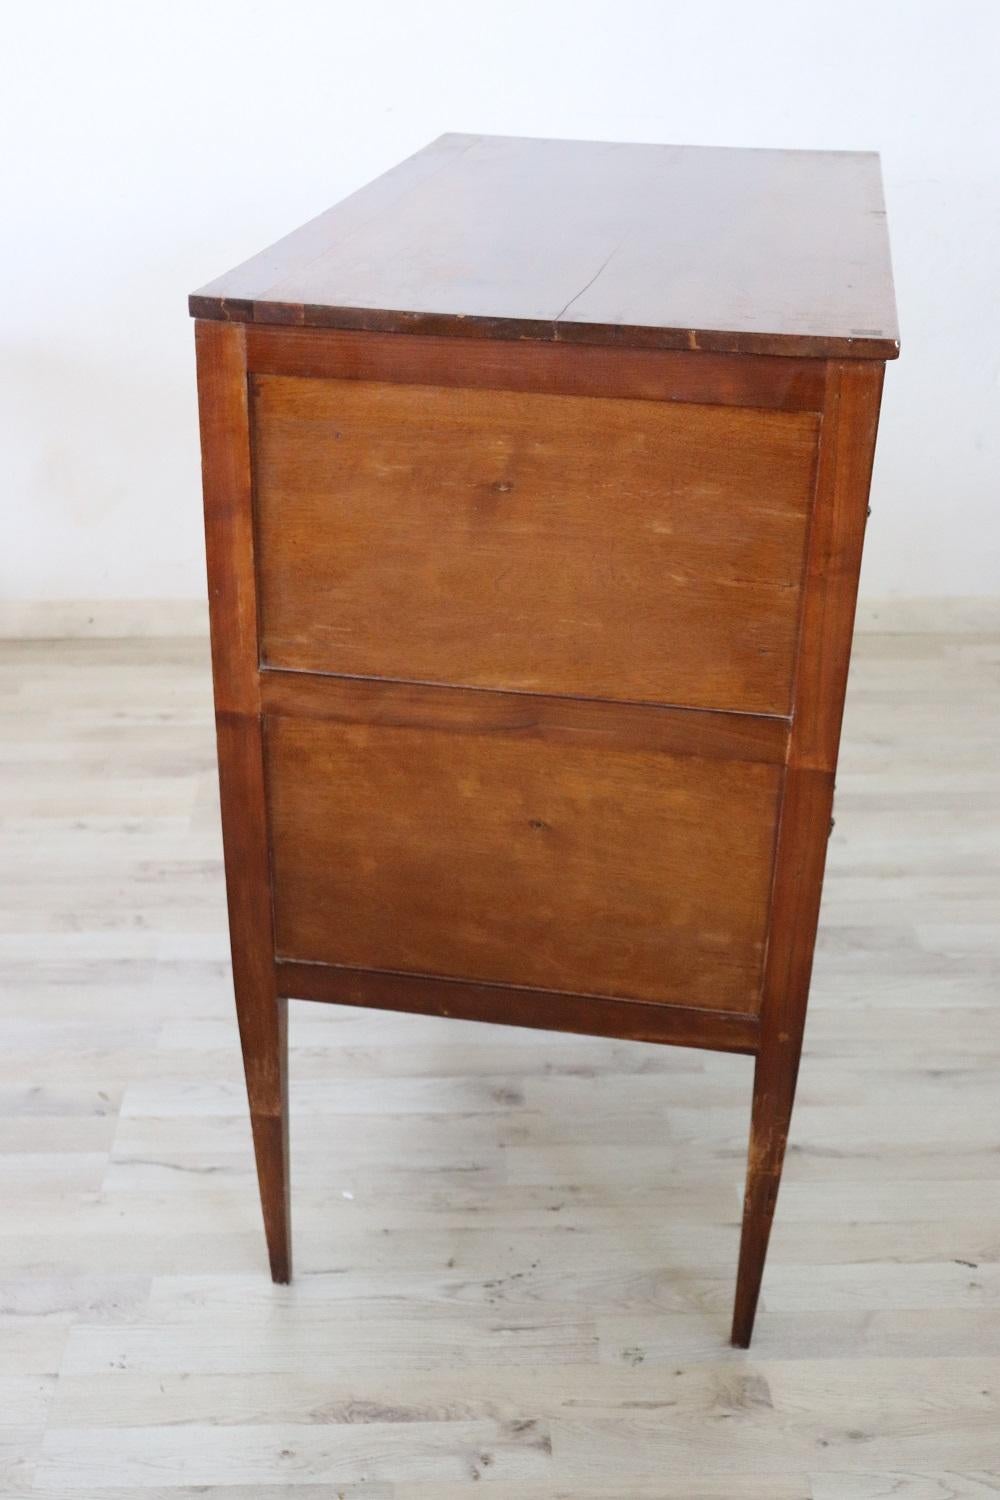 Late 18th Century 18th Century Italian Louis XVI Solid Walnut Small Chest of Drawers